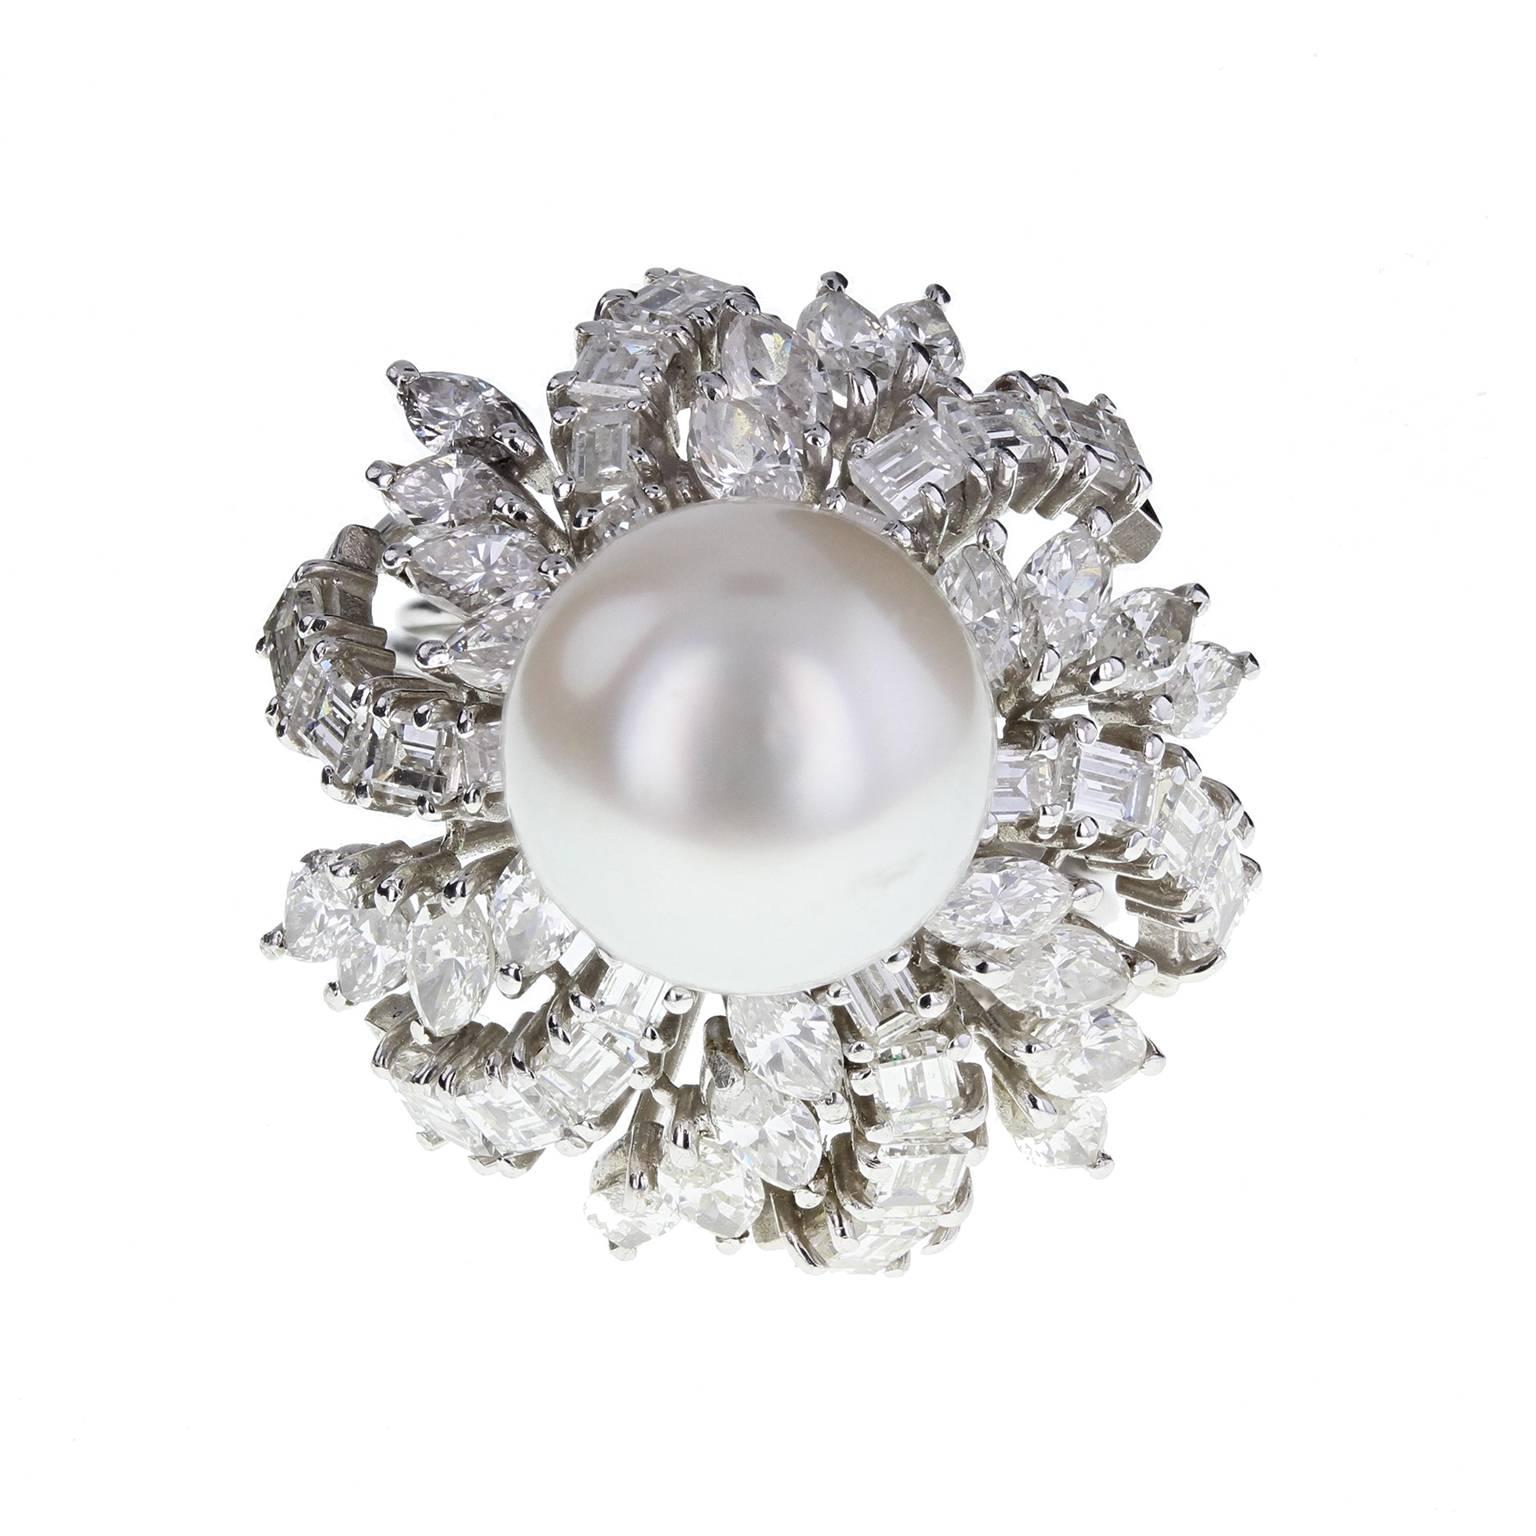 A beautiful cocktail ring centered with a large pearl of good lustre, surrounded by a 'skirt' of alternating rows of marquise and emerald-cut diamonds. Shank comprising five 'wires' of white gold, splitting at the shoulders. An impressive and